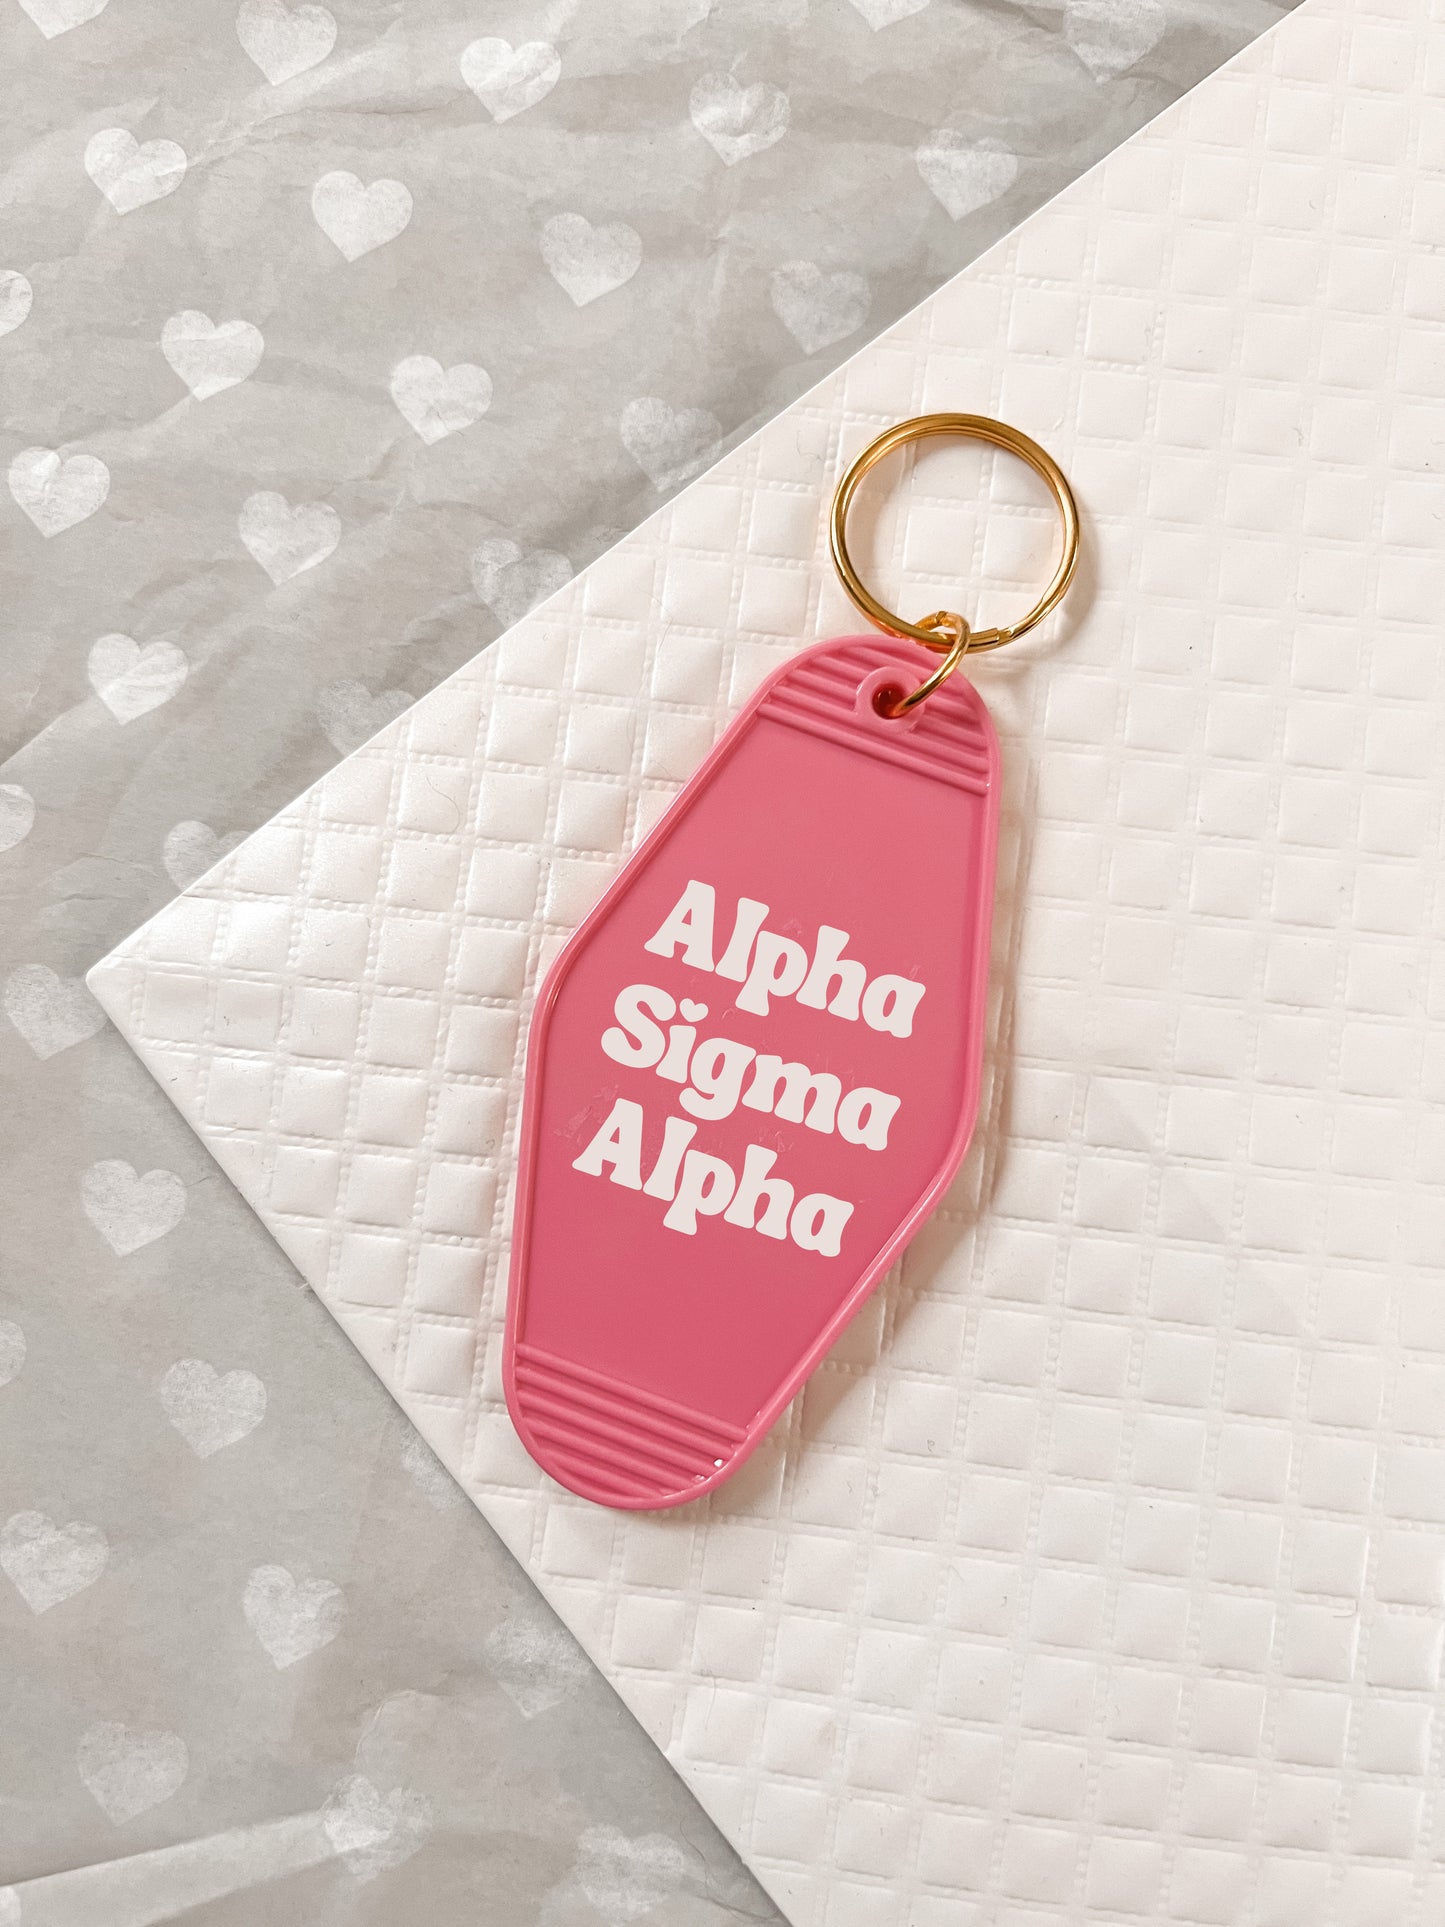 Alpha Sigma Alpha Motel Hotel Key Chain in Hot pink with white letters and gold ring. ASA